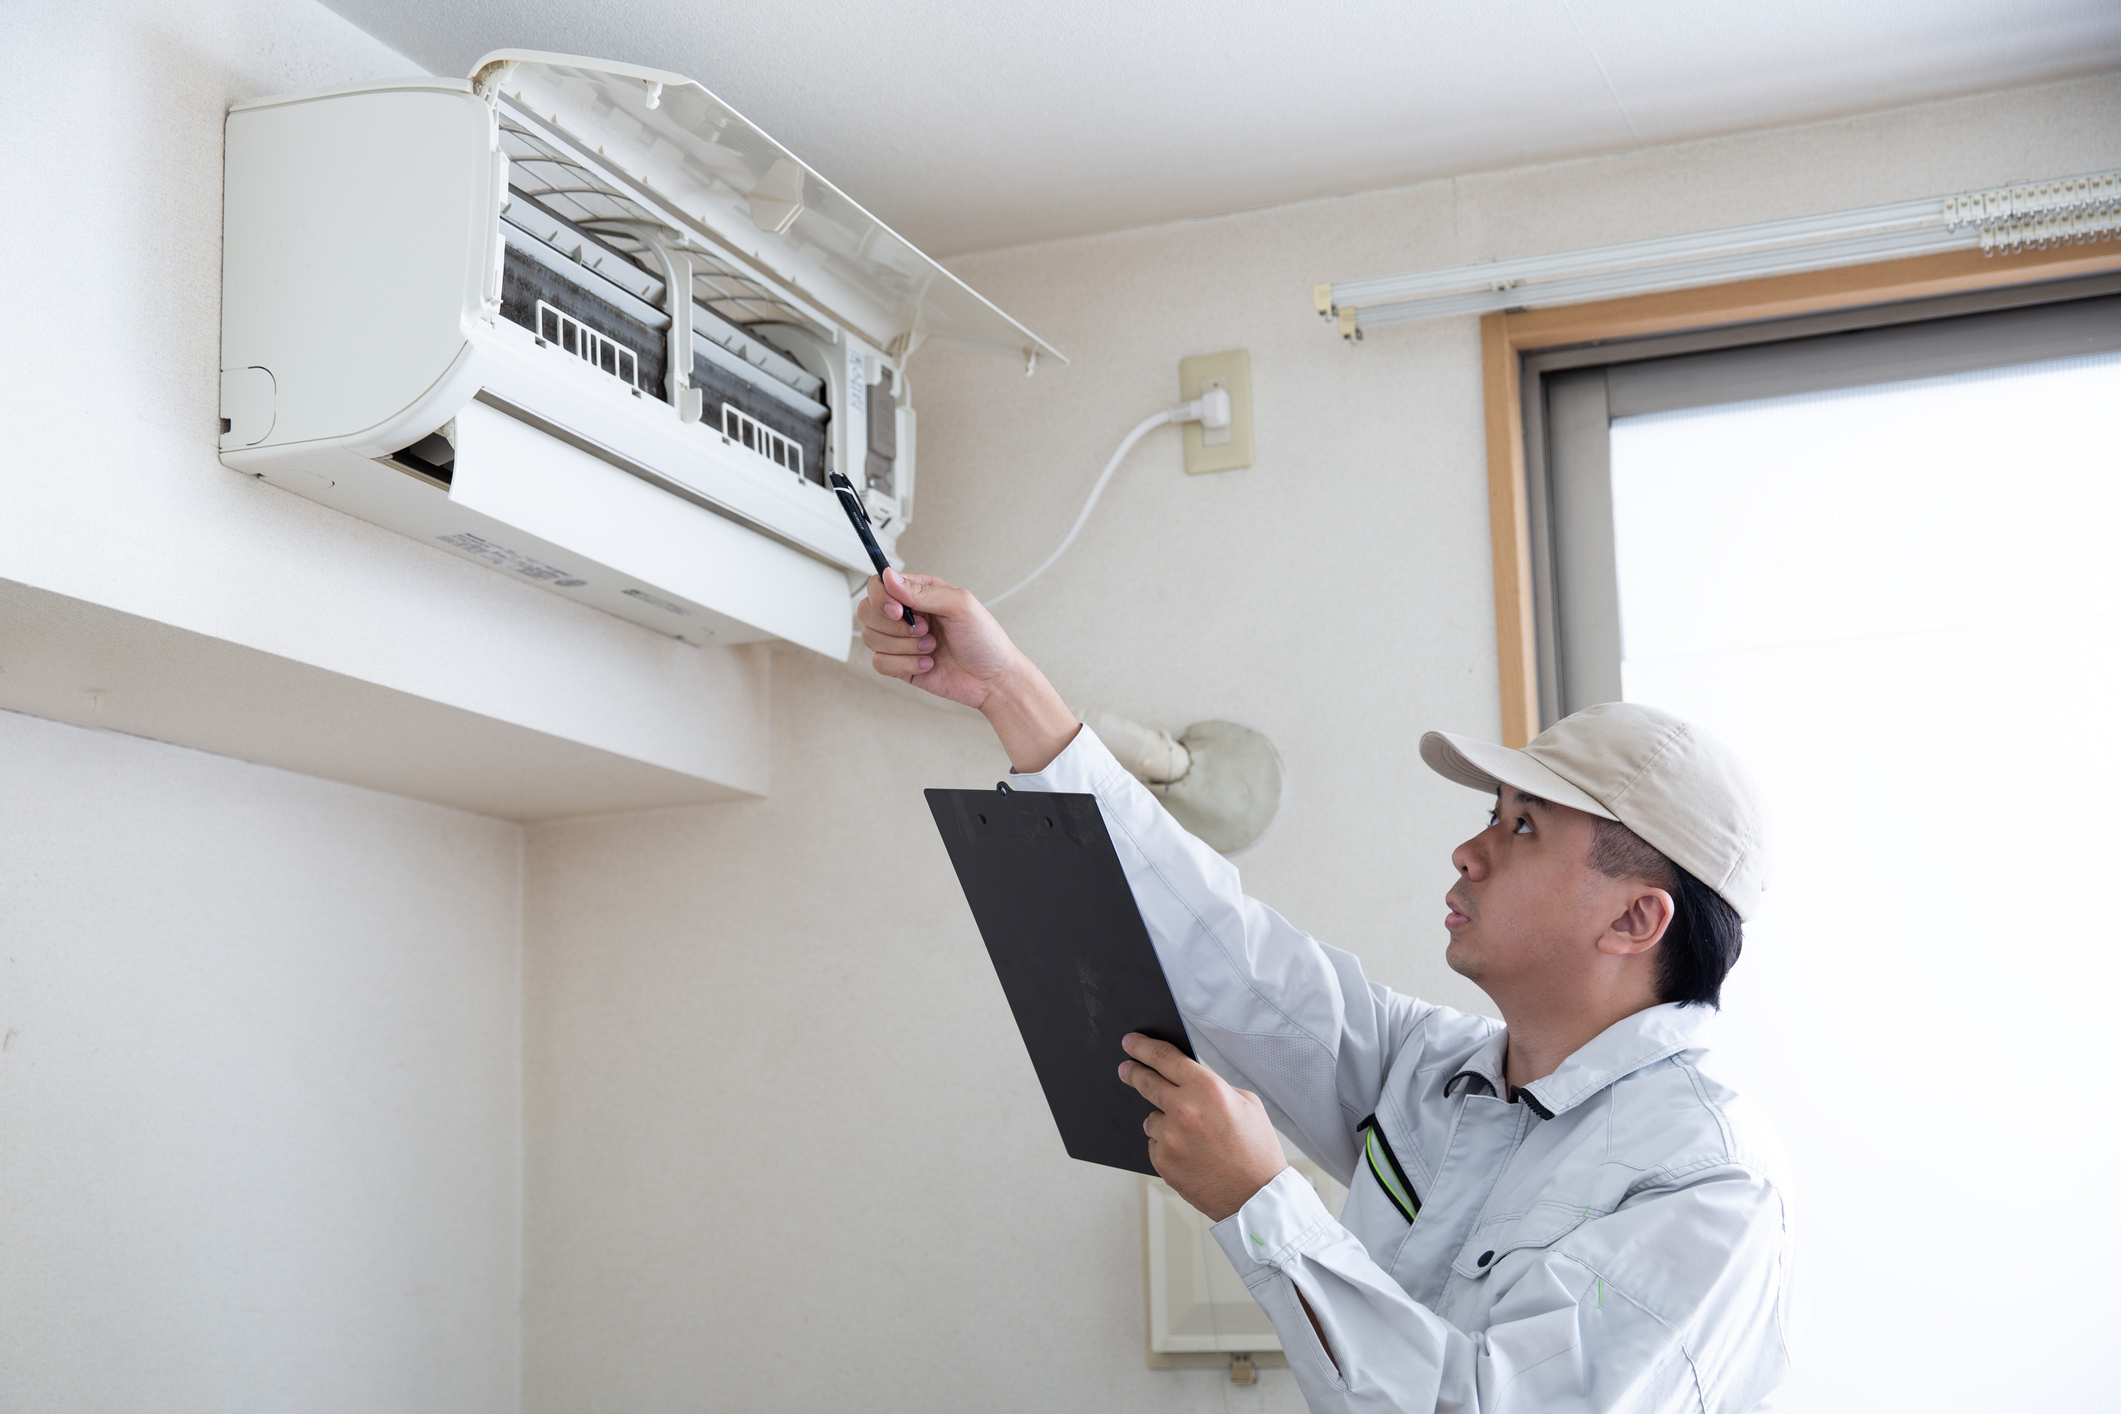 AC tune-up services